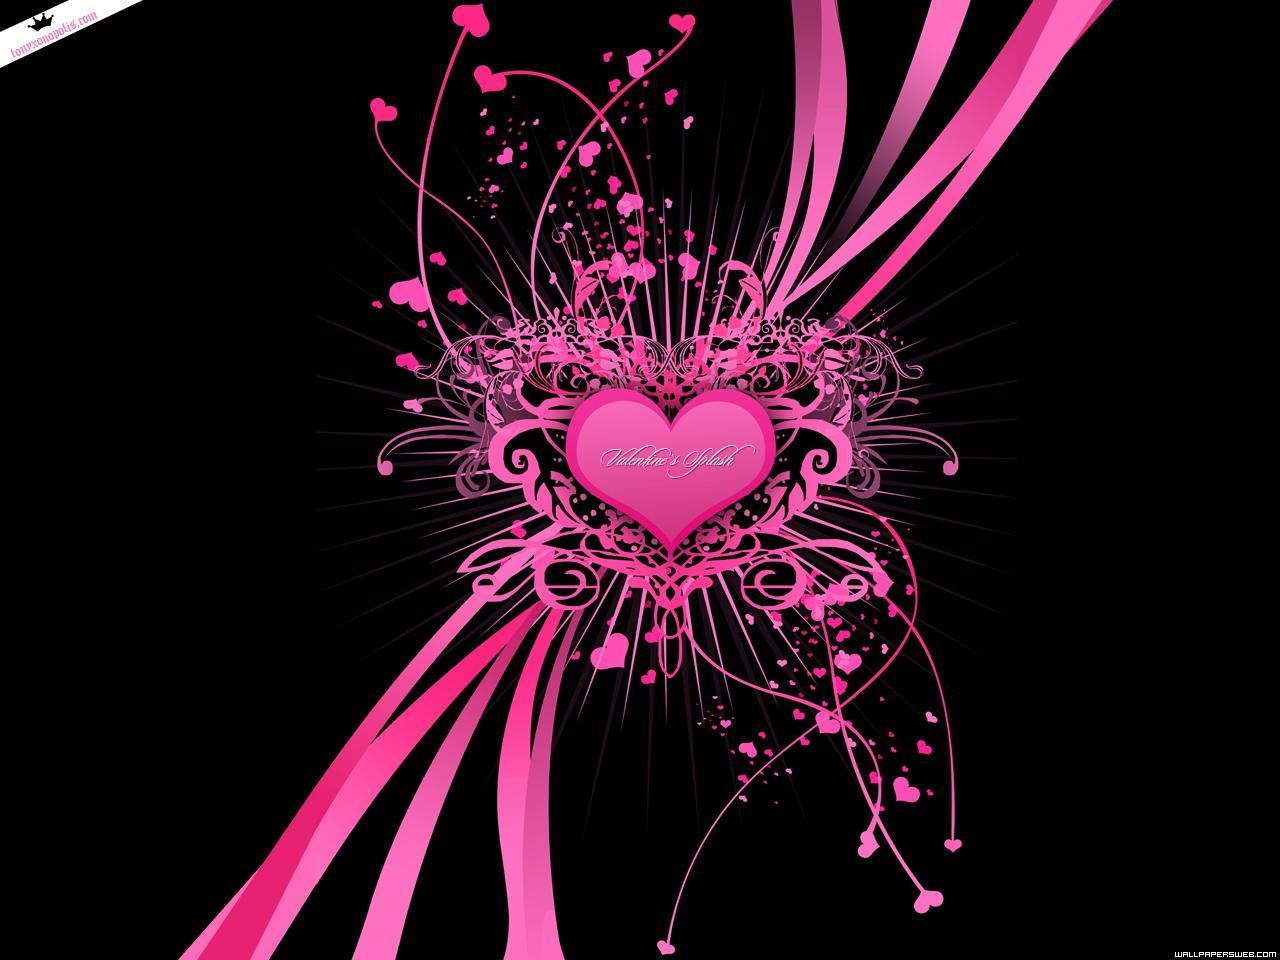 Wallpaper Backgrounds Cute Heart and Love Wallpapers with Different